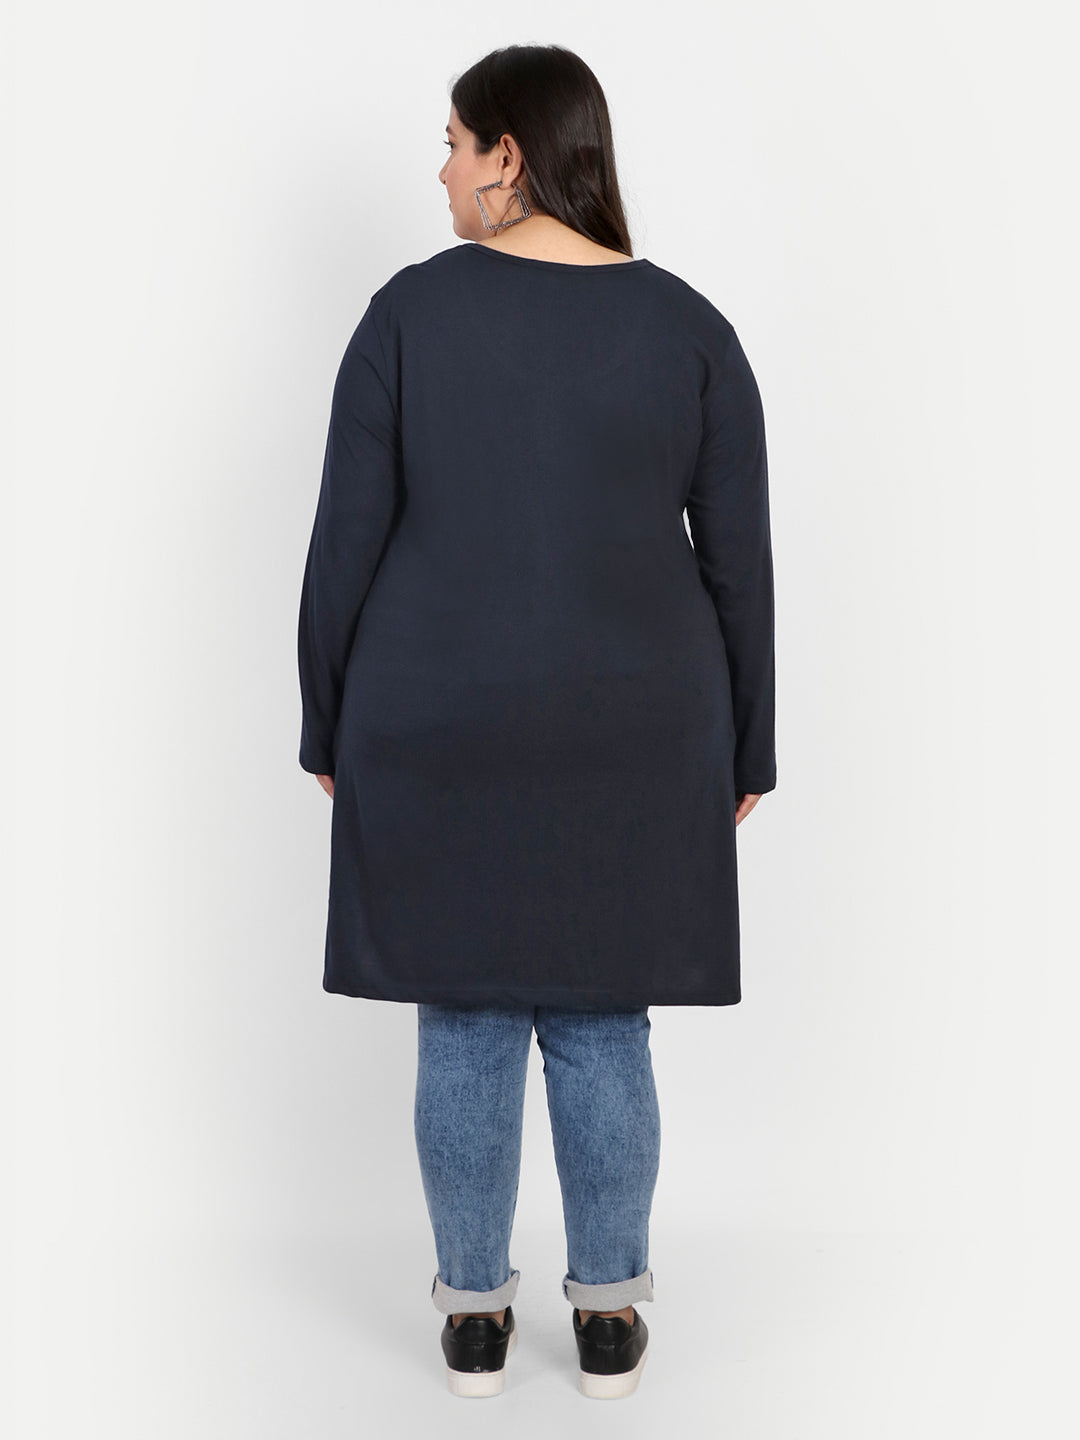 Stylish Cotton Long Top for Women Plus Size - Full Sleeve - Navy Blue Online In India